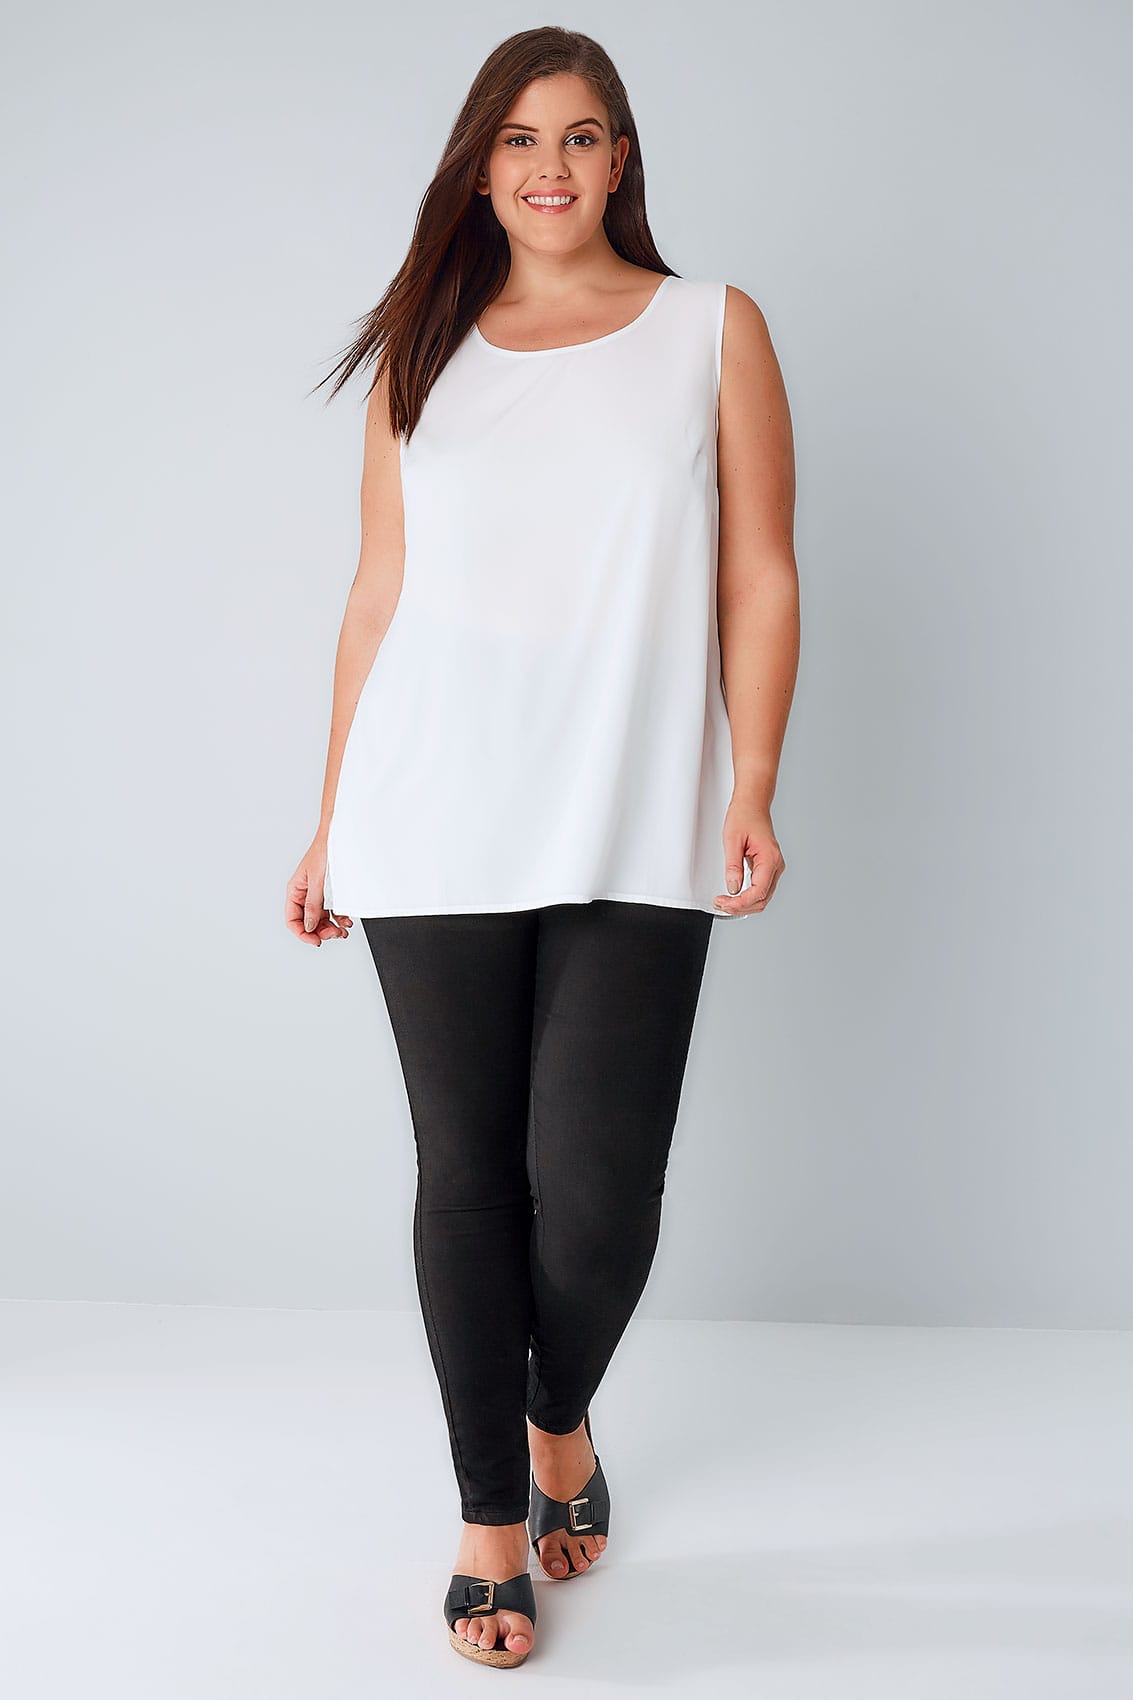 White Sleeveless Top With Side Splits1133 x 1700